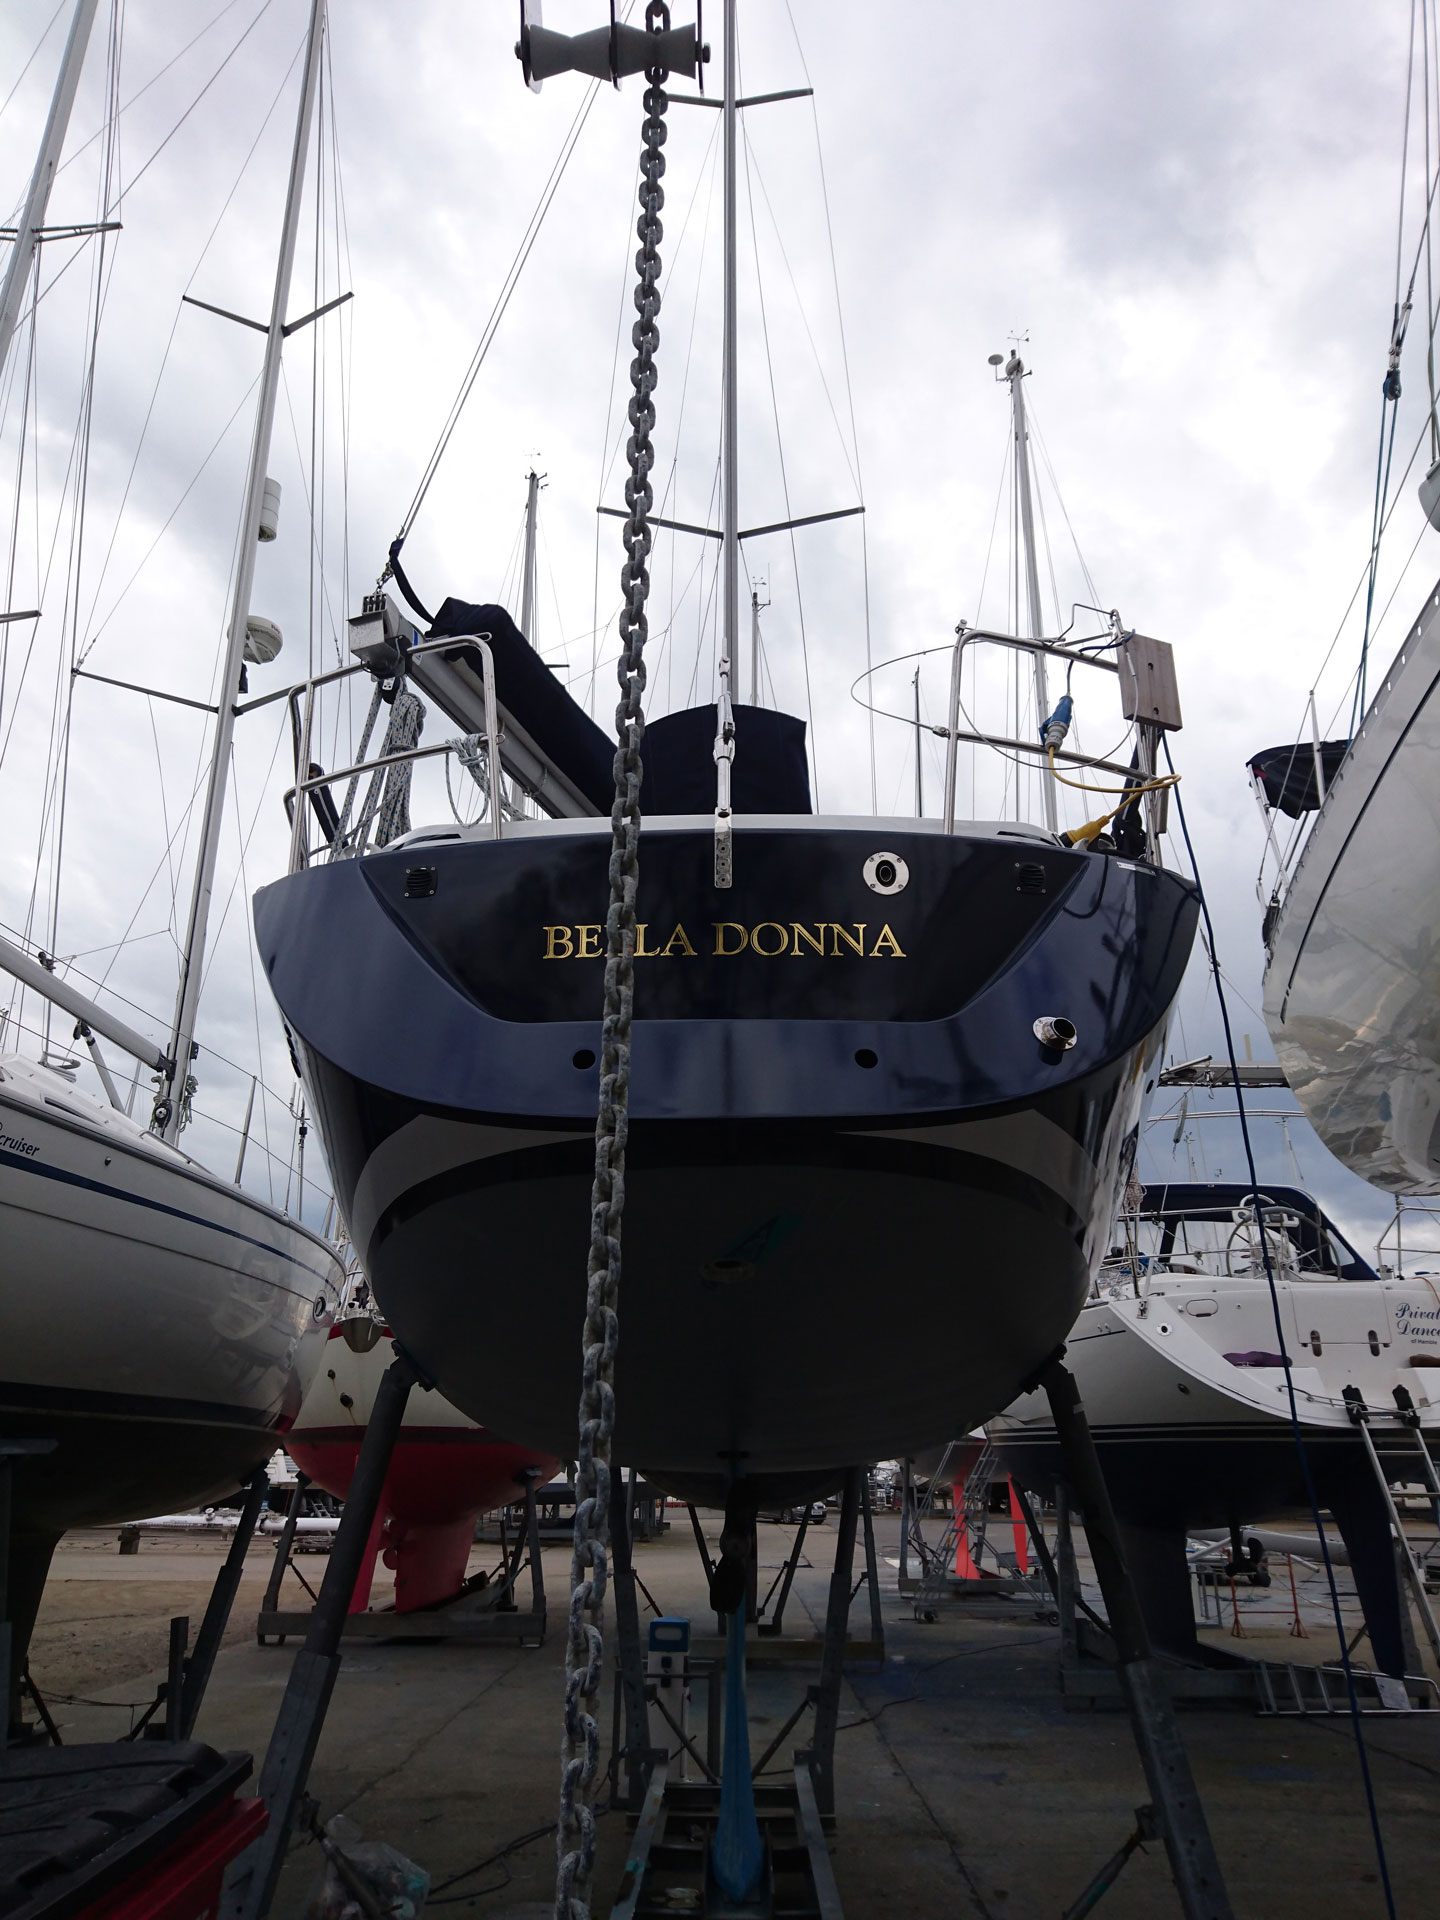 Another sailing yacht transom boat name decal has been applied here by the river Hamble, Southampton.